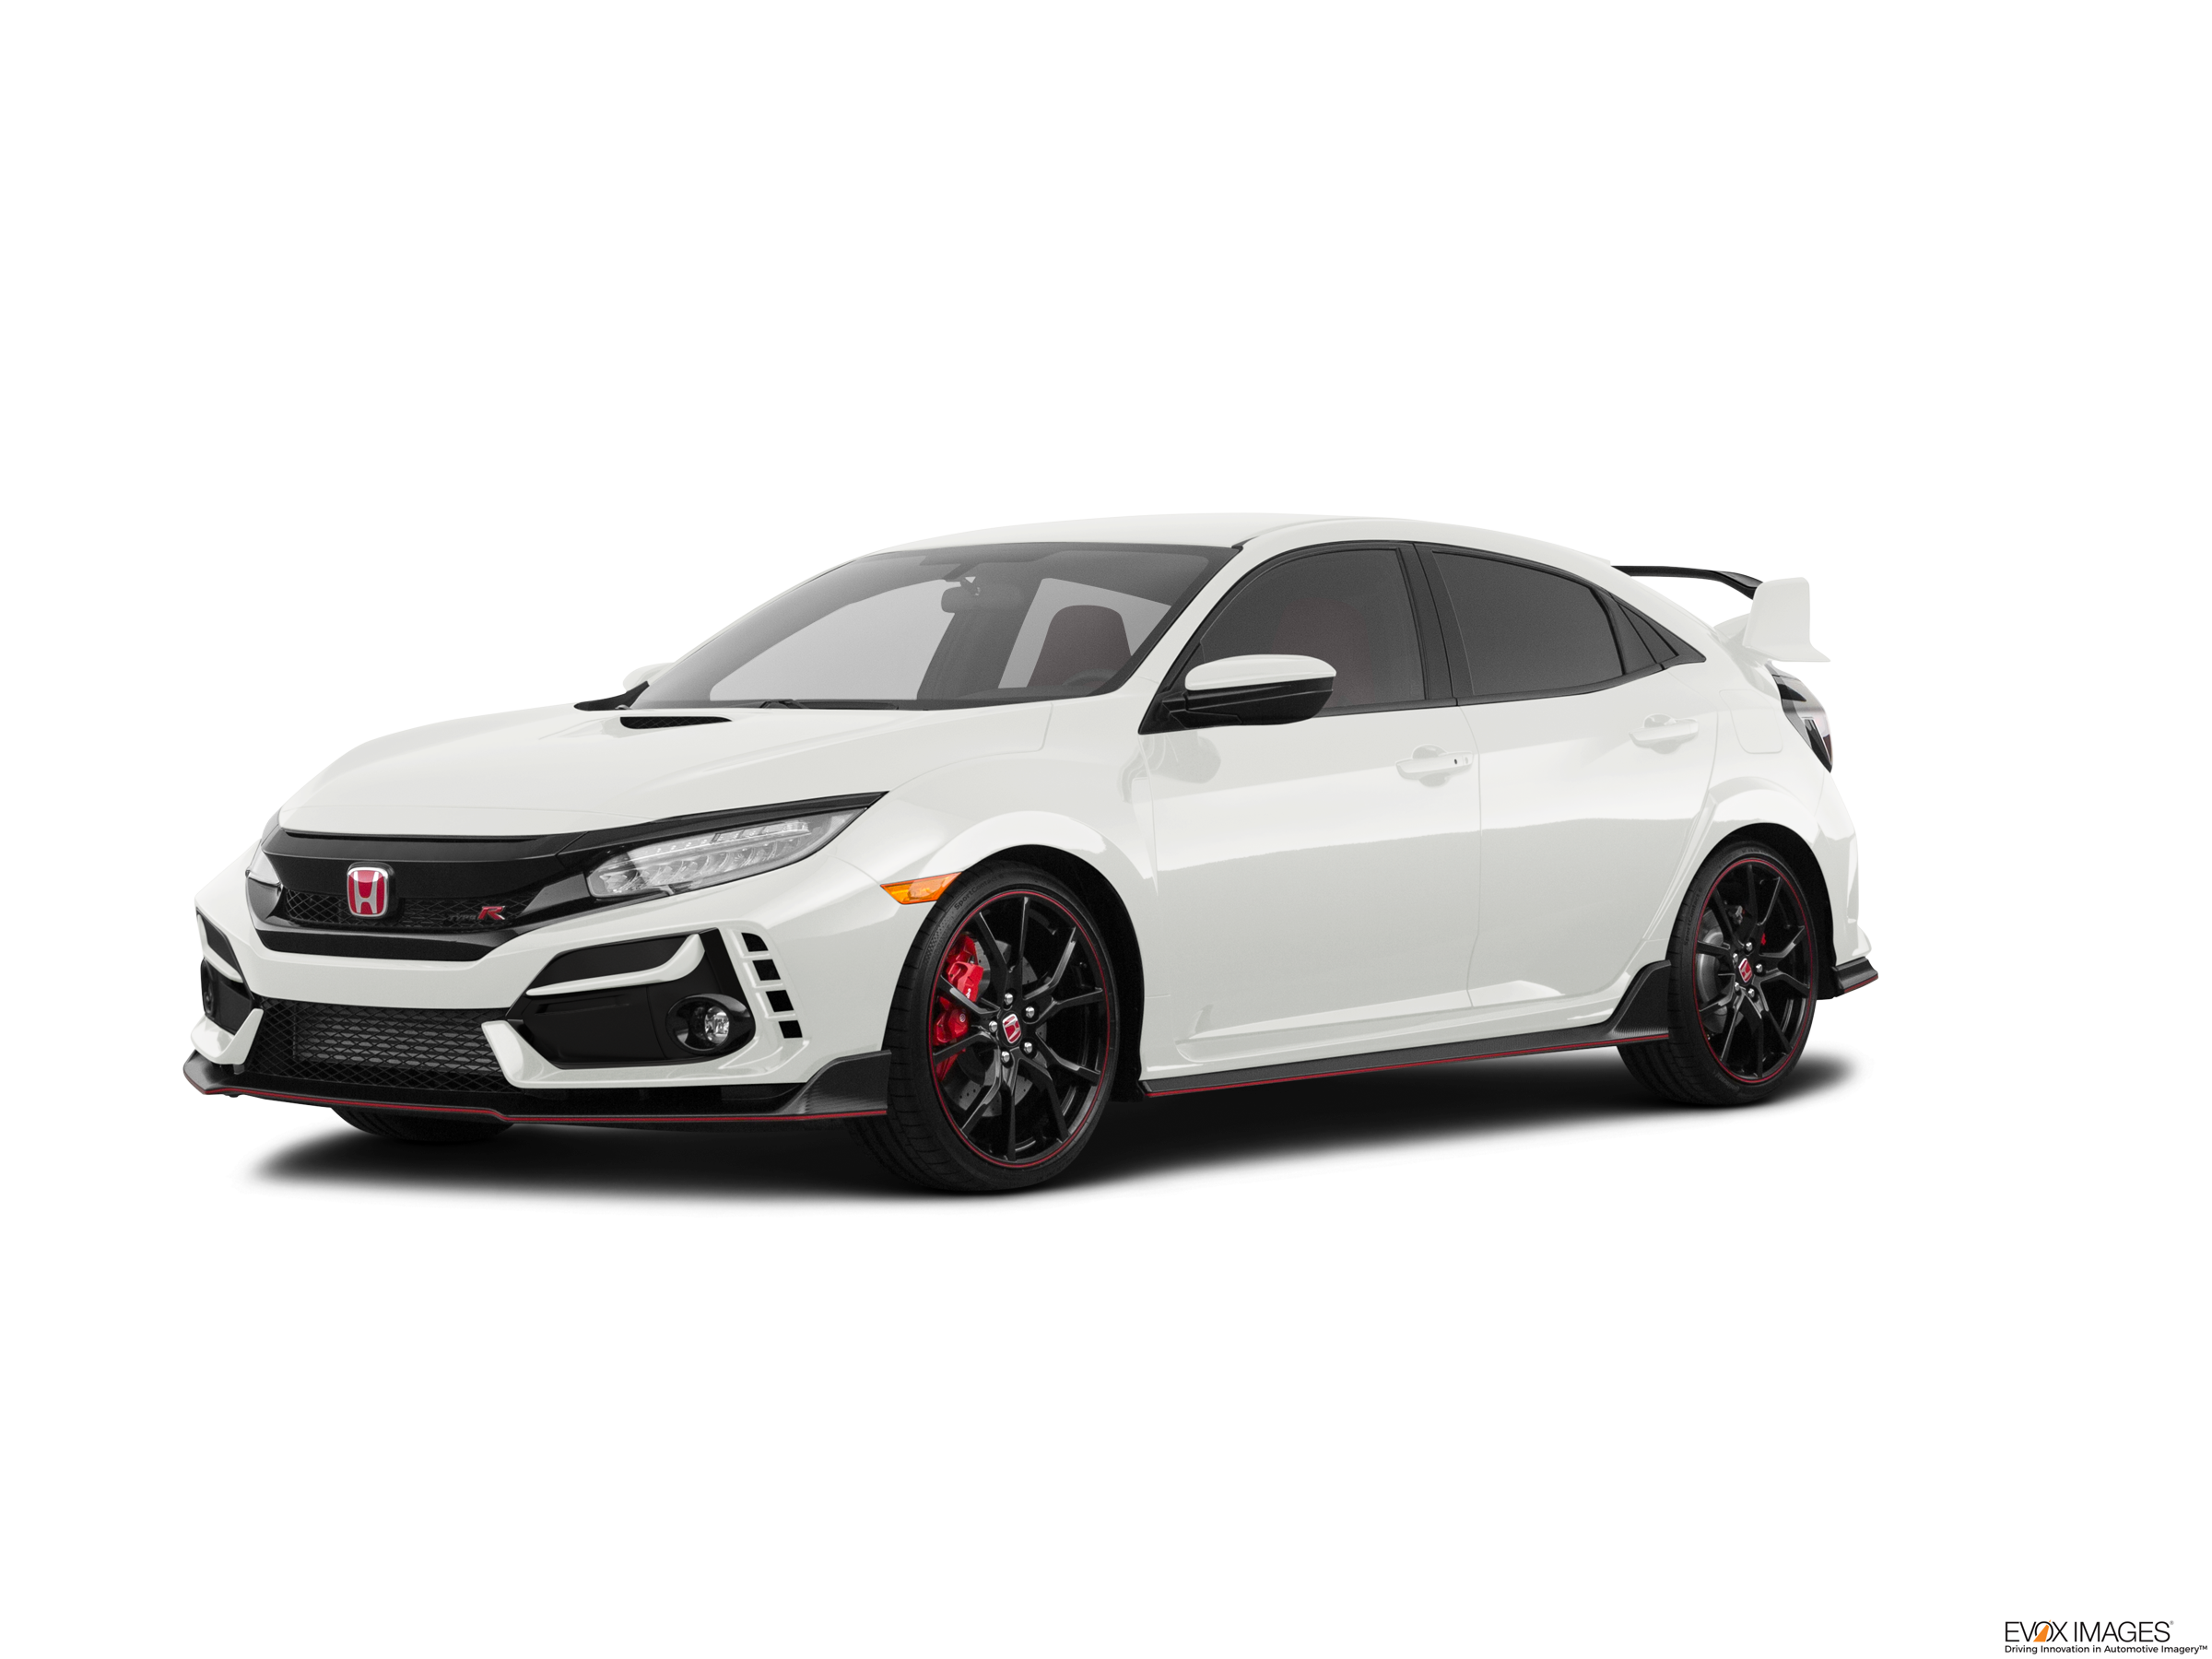 2021 Honda Civic Type R : Latest Prices, Reviews, Specs, Photos and  Incentives